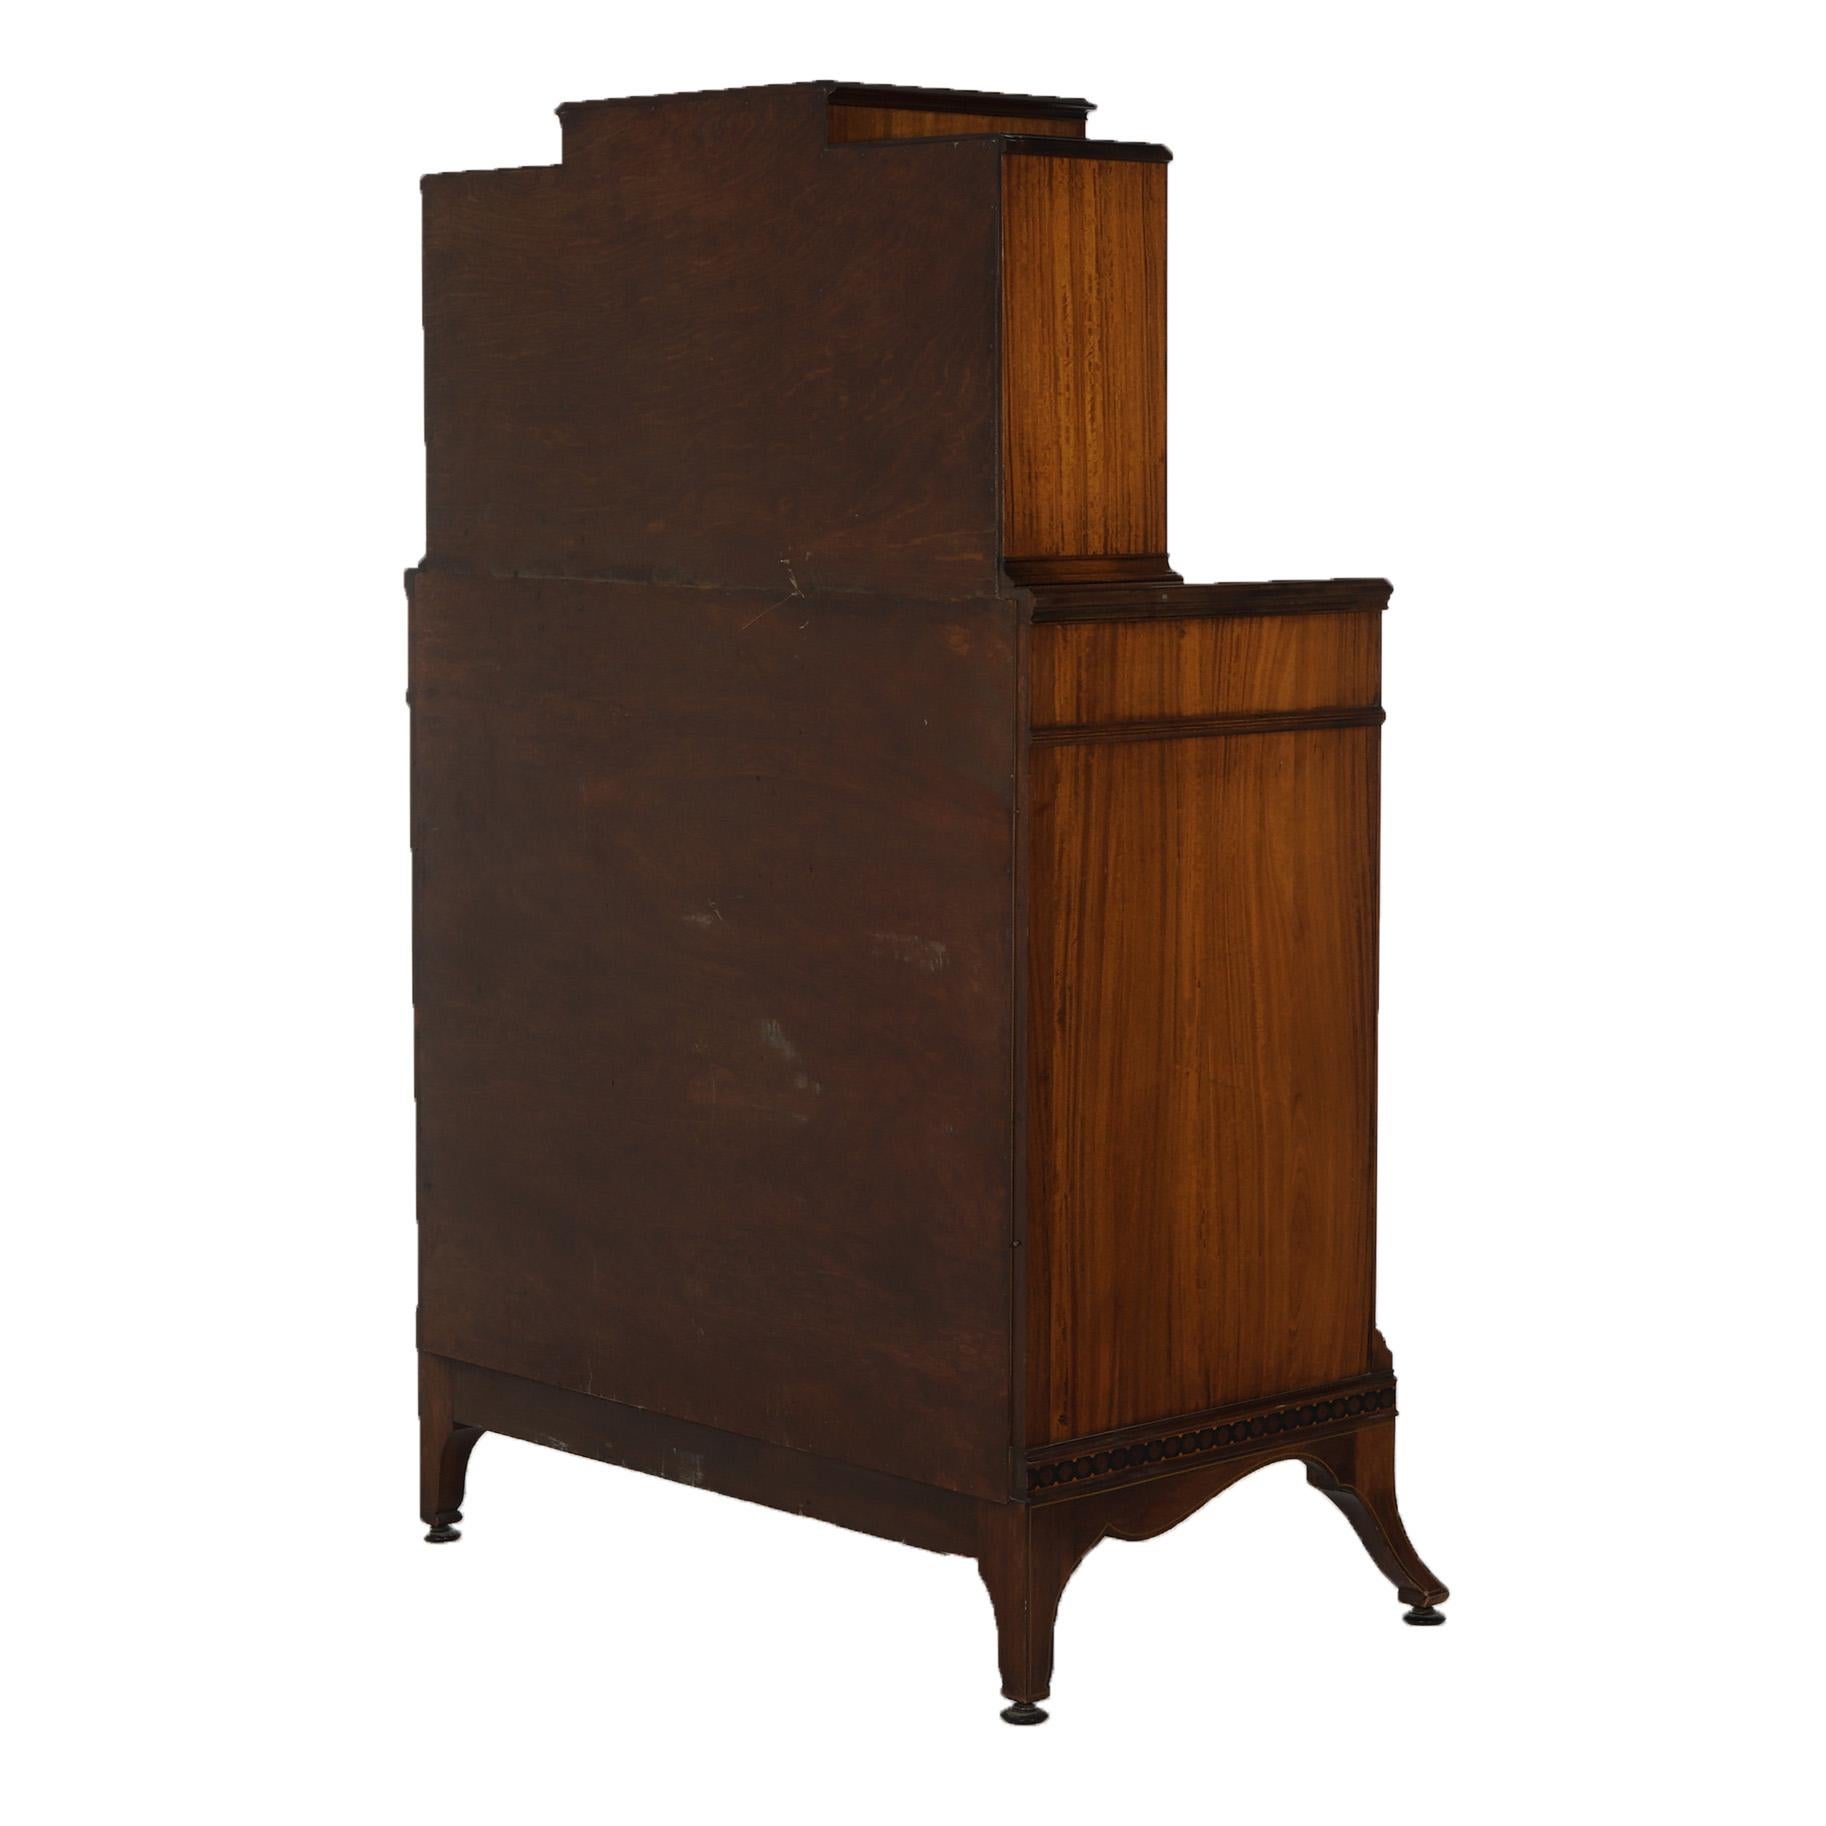 Antique Johnson Furniture Co. Satinwood & Mahogany Marquetry Chifferobe Dresser For Sale 7